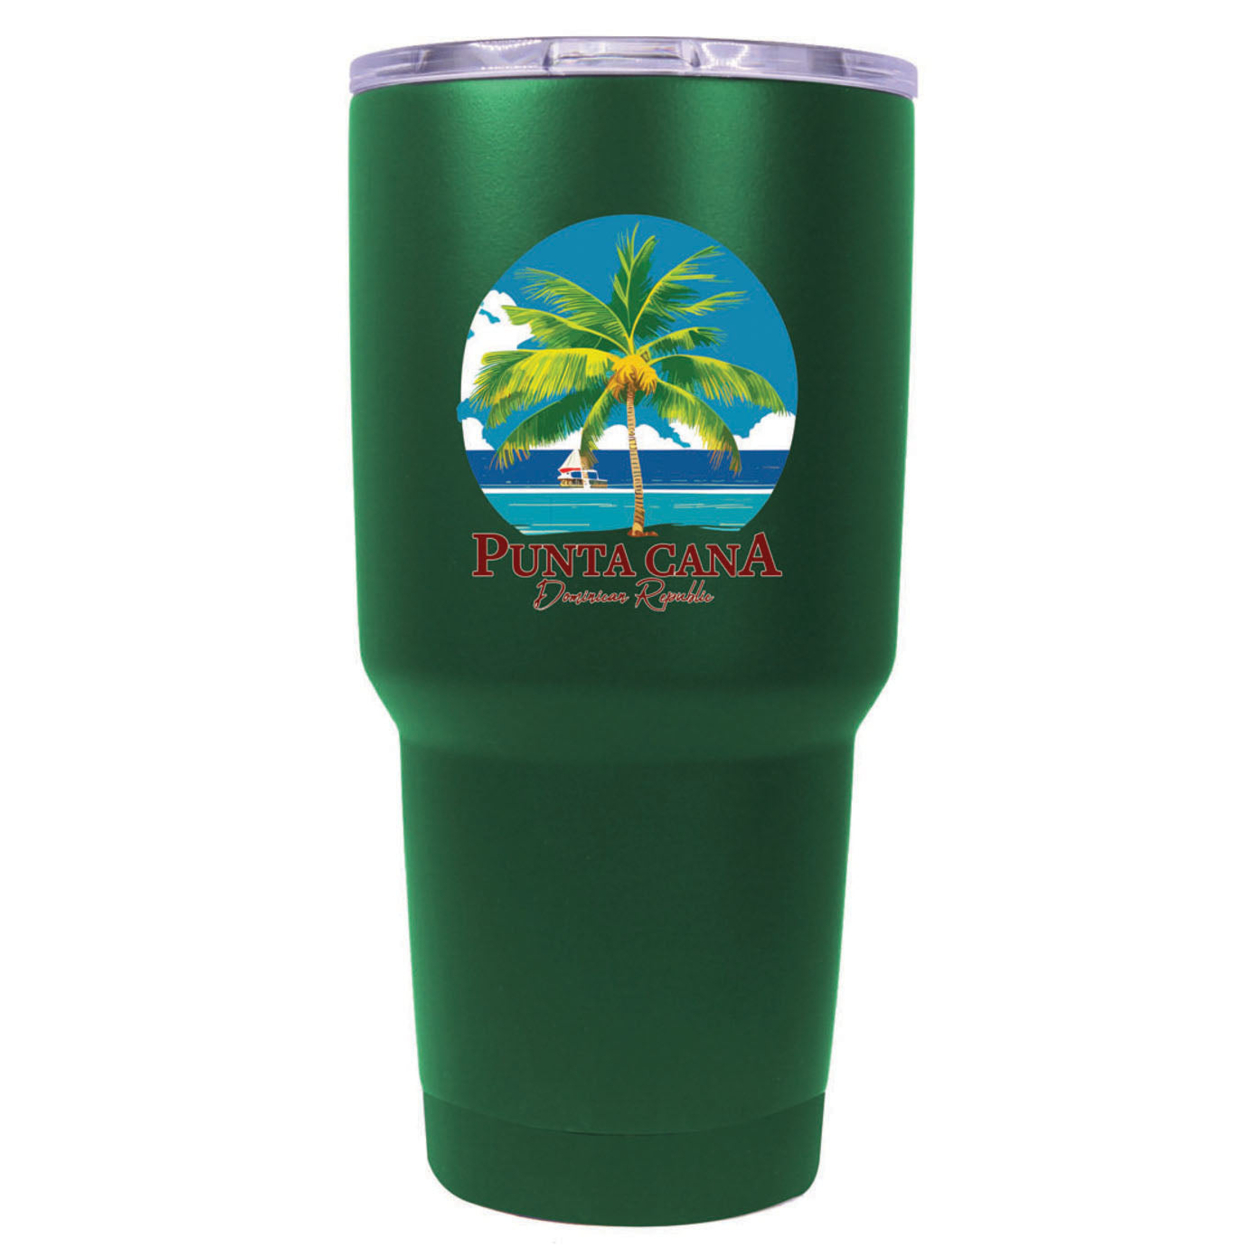 Punta Cana Dominican Republic Souvenir 24 Oz Insulated Stainless Steel Tumbler - Navy, PARROT